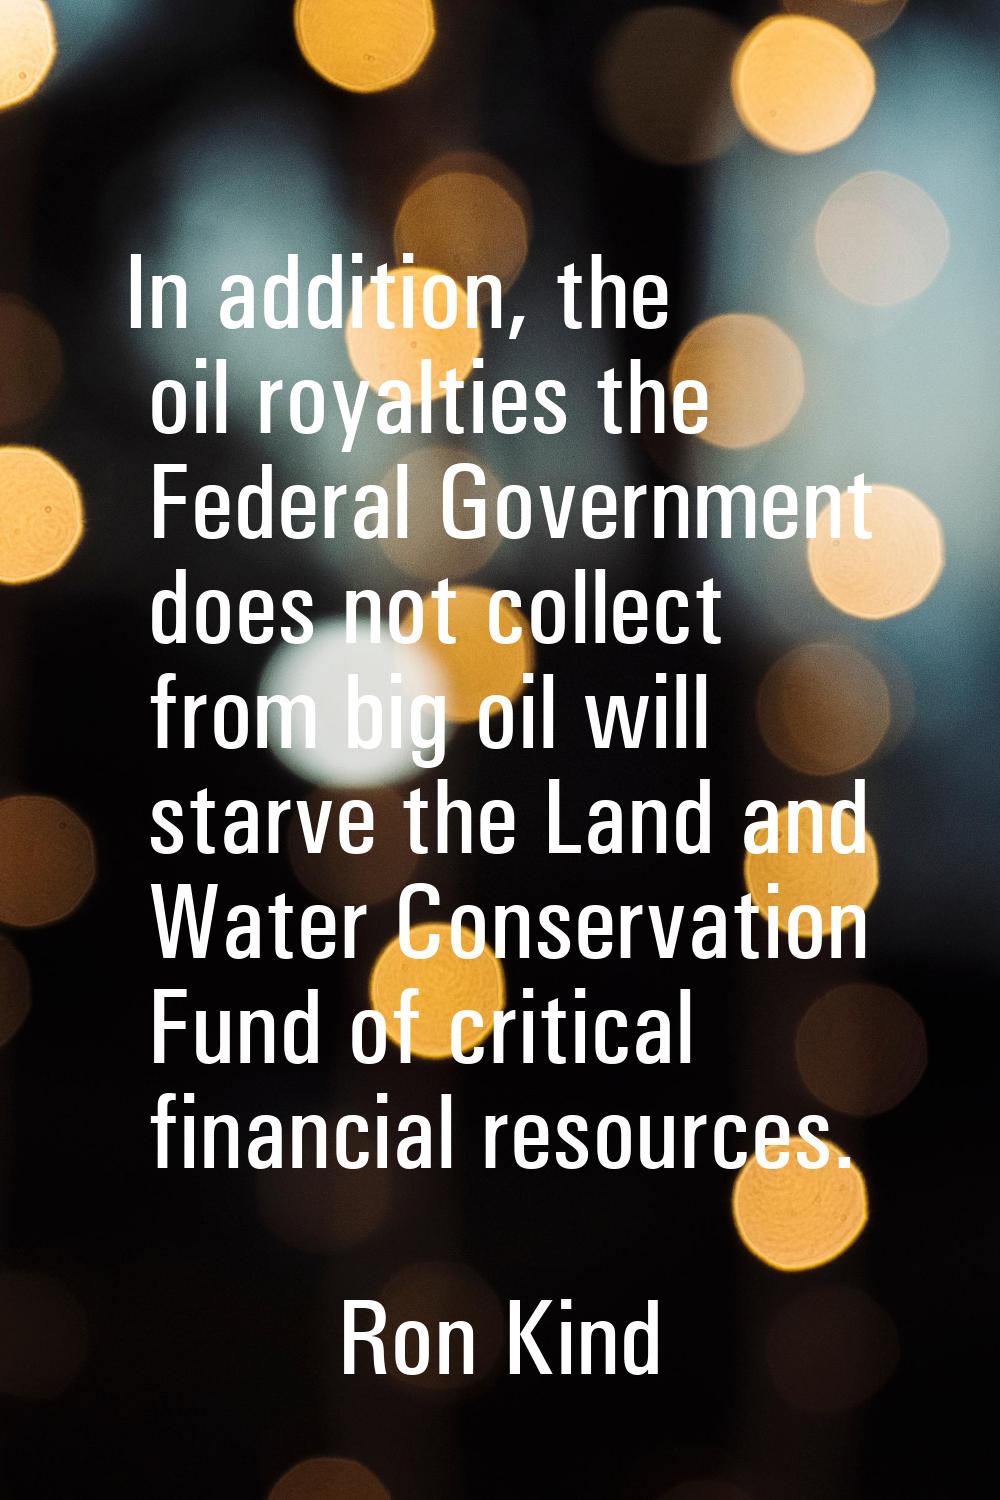 In addition, the oil royalties the Federal Government does not collect from big oil will starve the